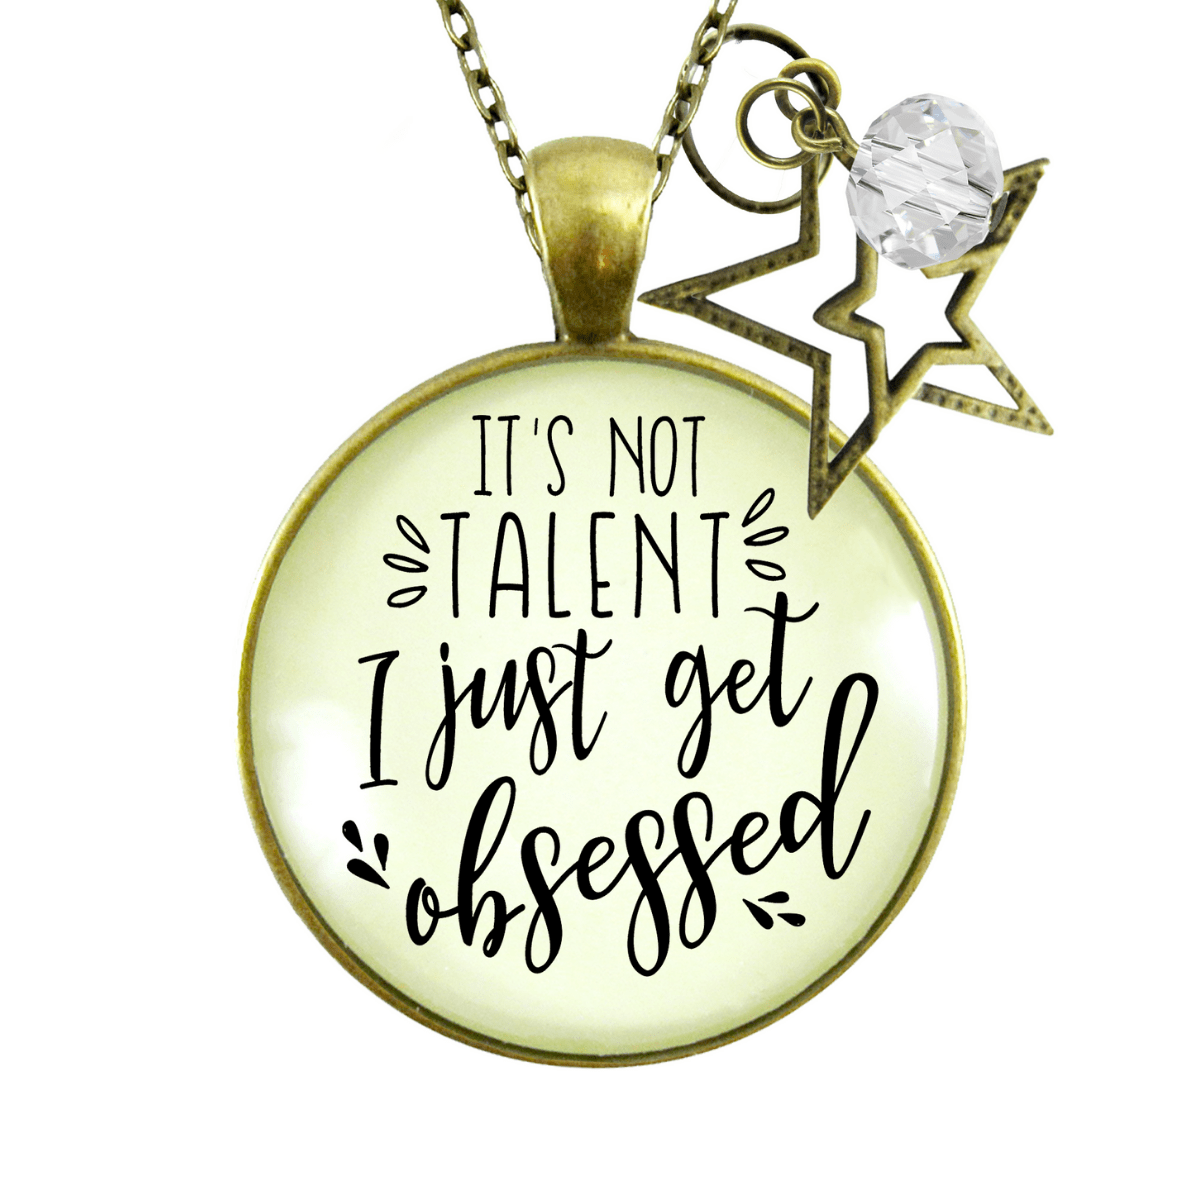 Gutsy Goodness Hustle Novelty Necklace It's Not Talent I Just Get Obsessed Boss Attitude Jewelry - Gutsy Goodness Handmade Jewelry;Hustle Novelty Necklace It's Not Talent I Just Get Obsessed Boss Attitude Jewelry - Gutsy Goodness Handmade Jewelry Gifts